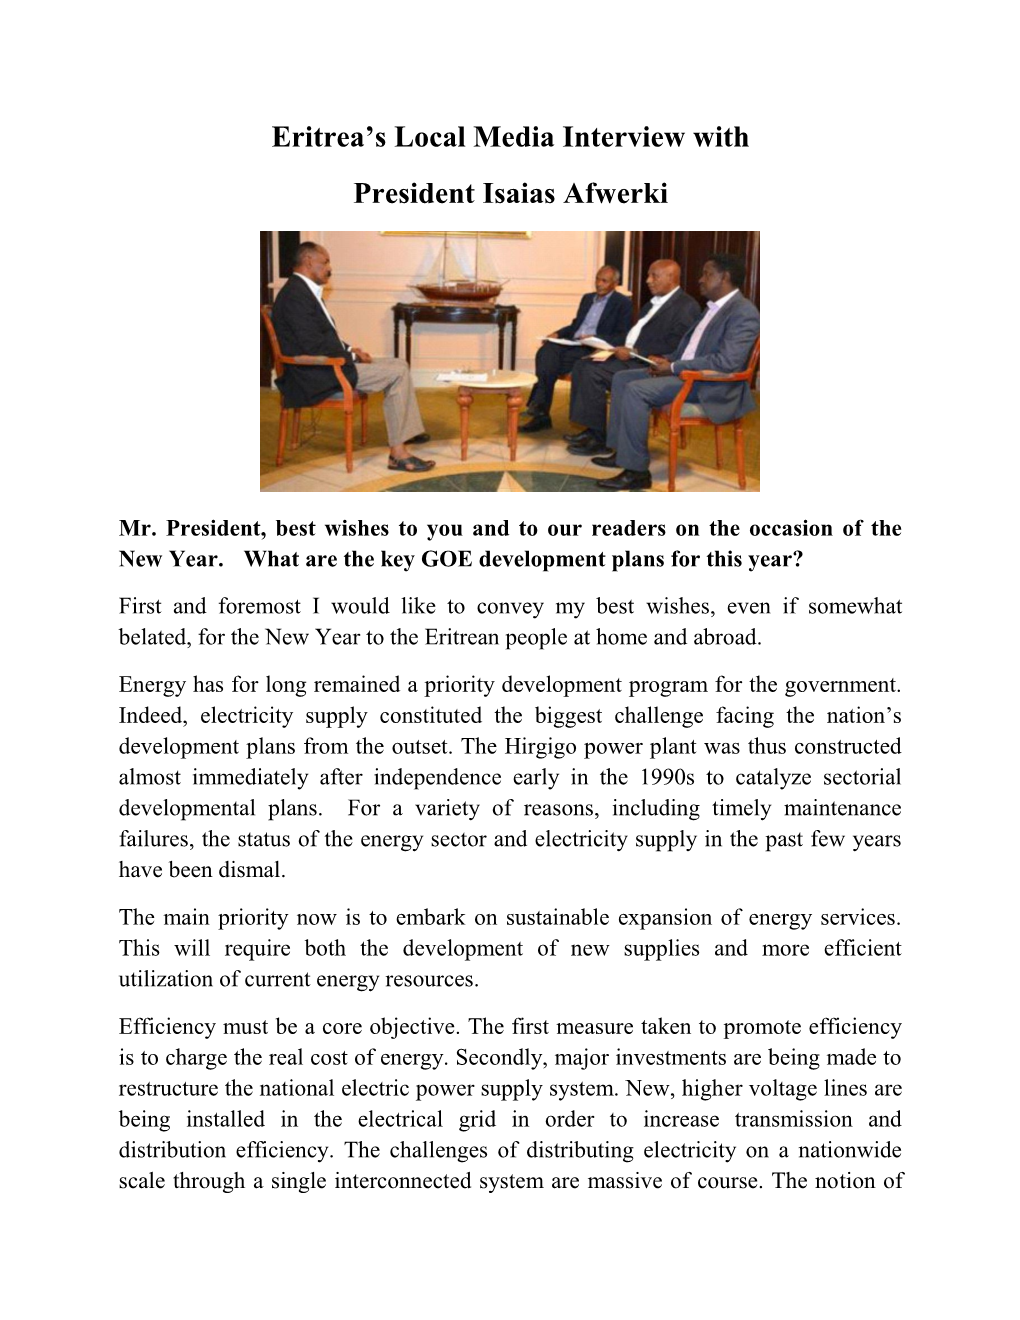 Eritrea's Local Media Interview with President Isaias Afwerki